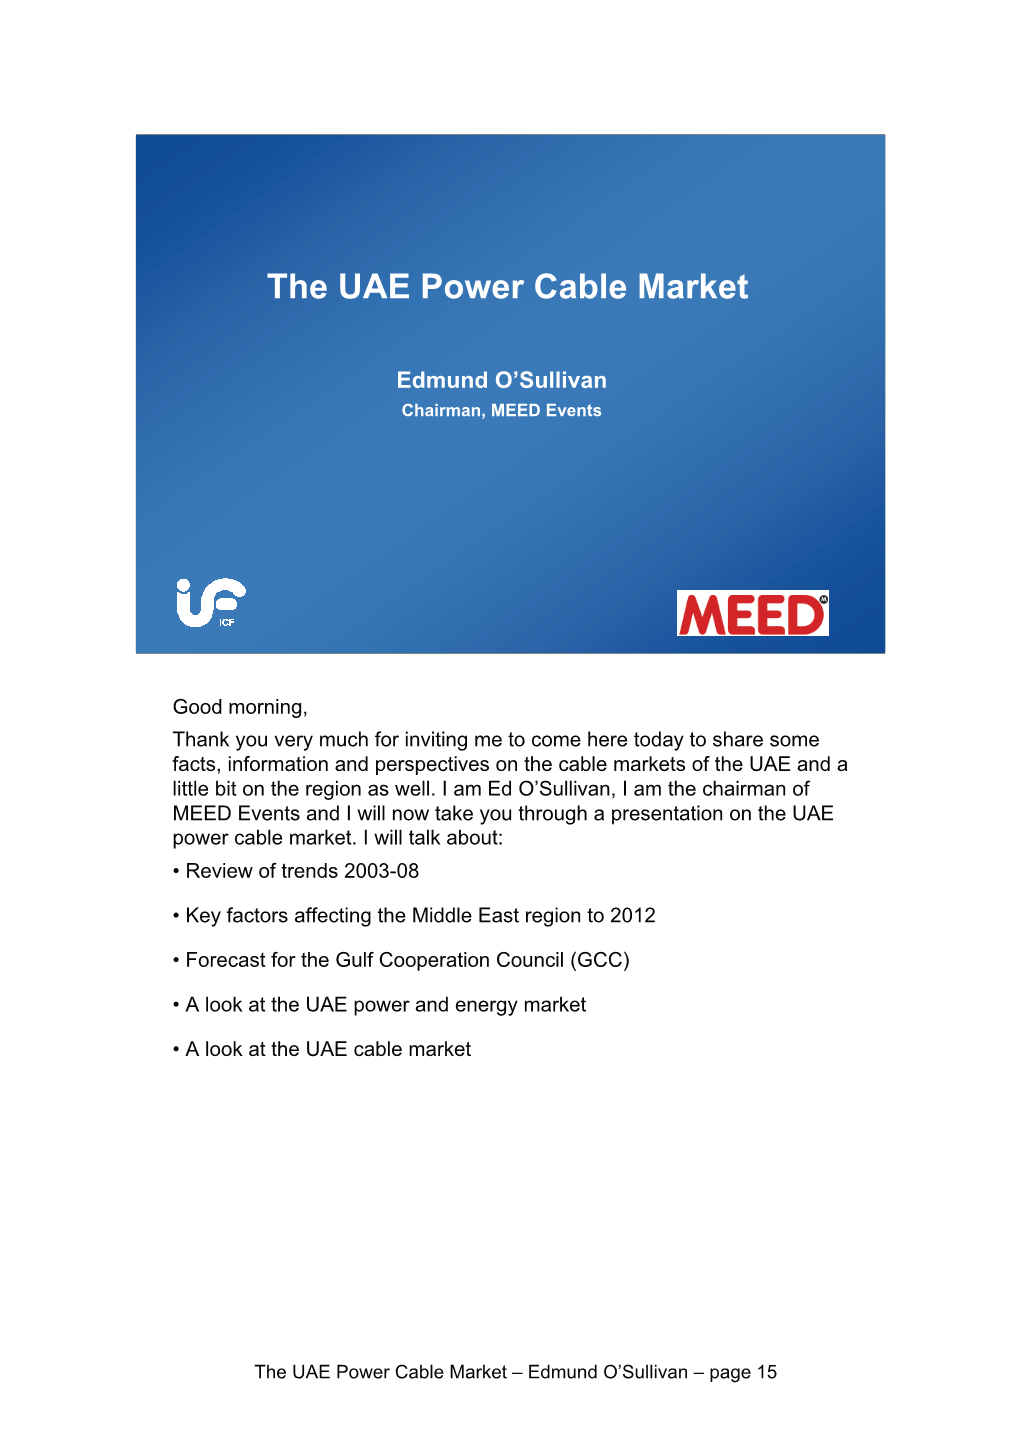 The UAE Power Cable Market